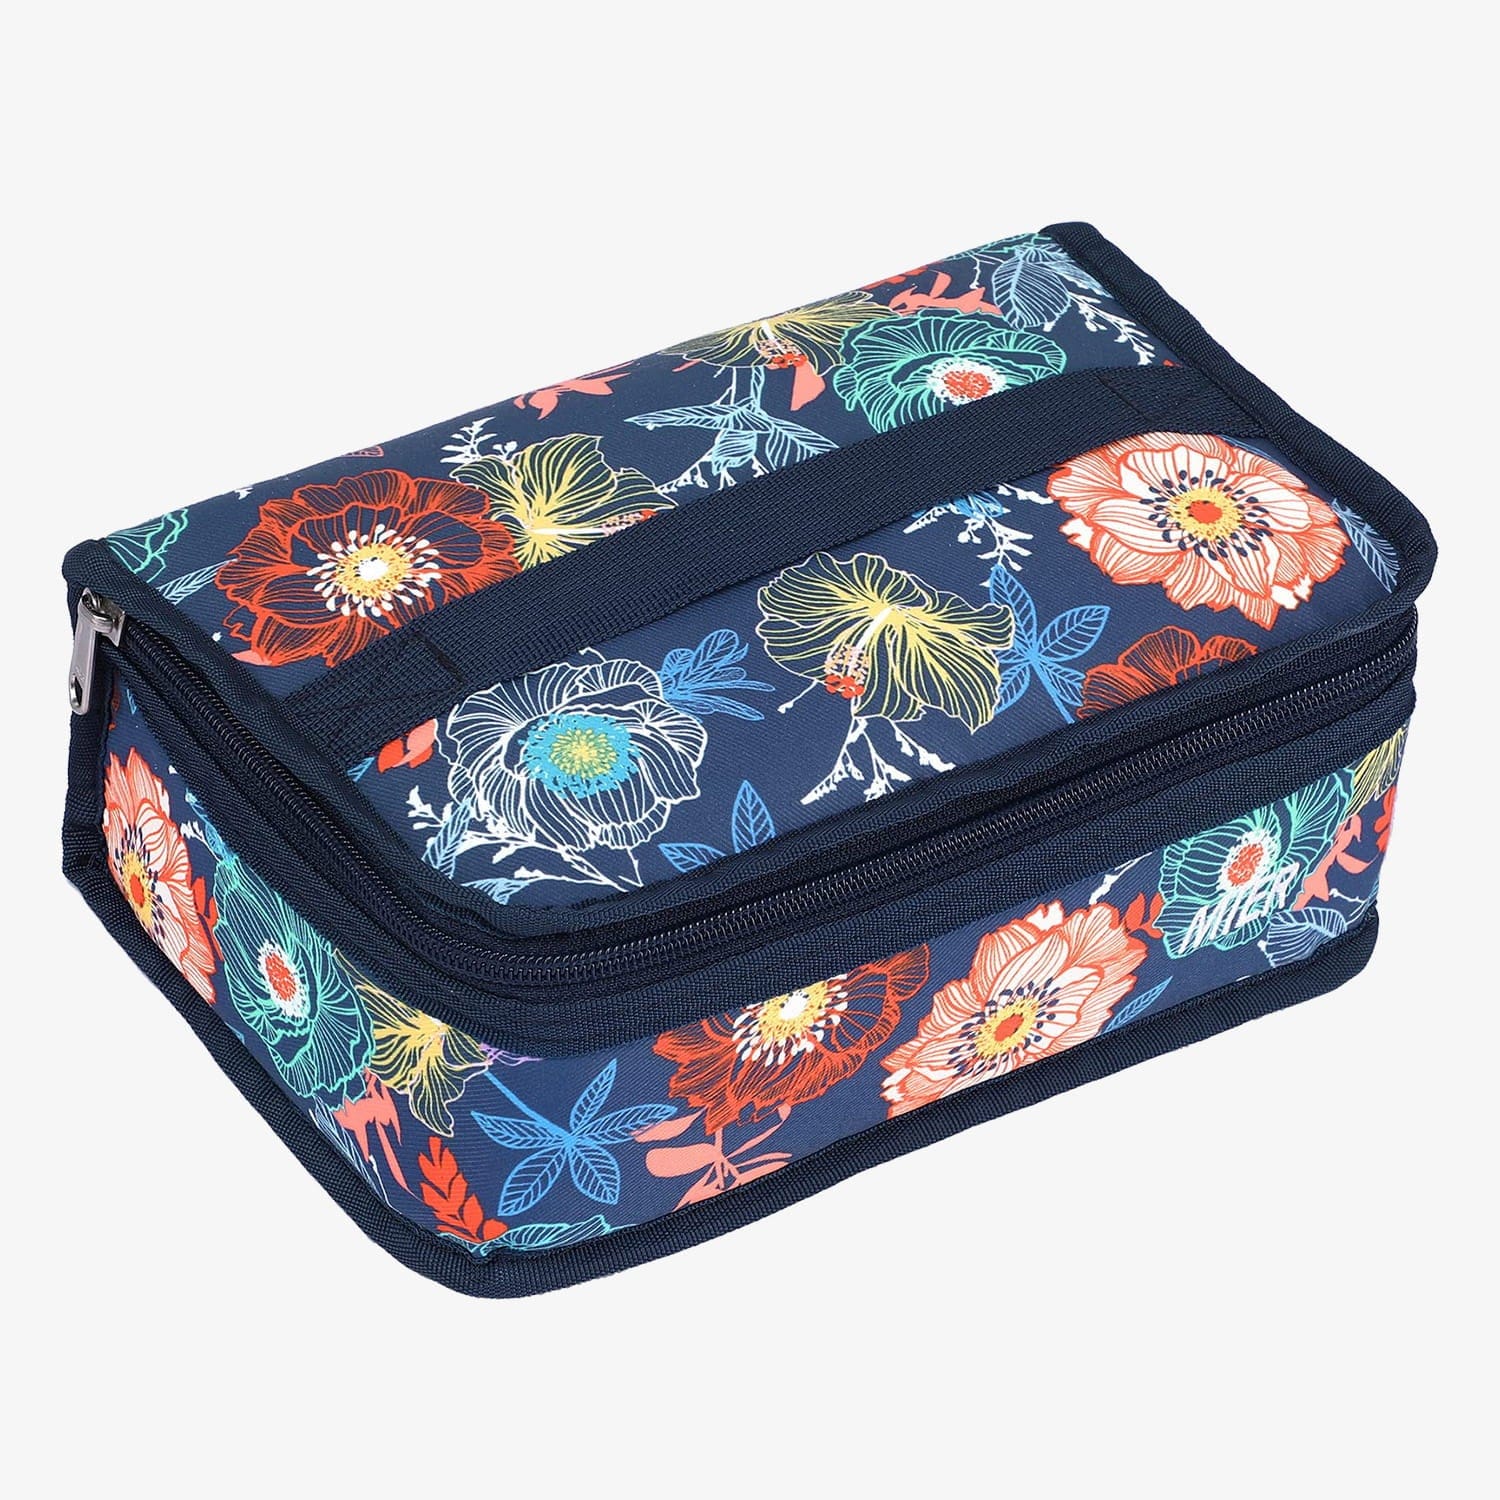 Portable Insulated Mini Lunch Bag for Kids Kids Lunch Bag Navy Floral MIER